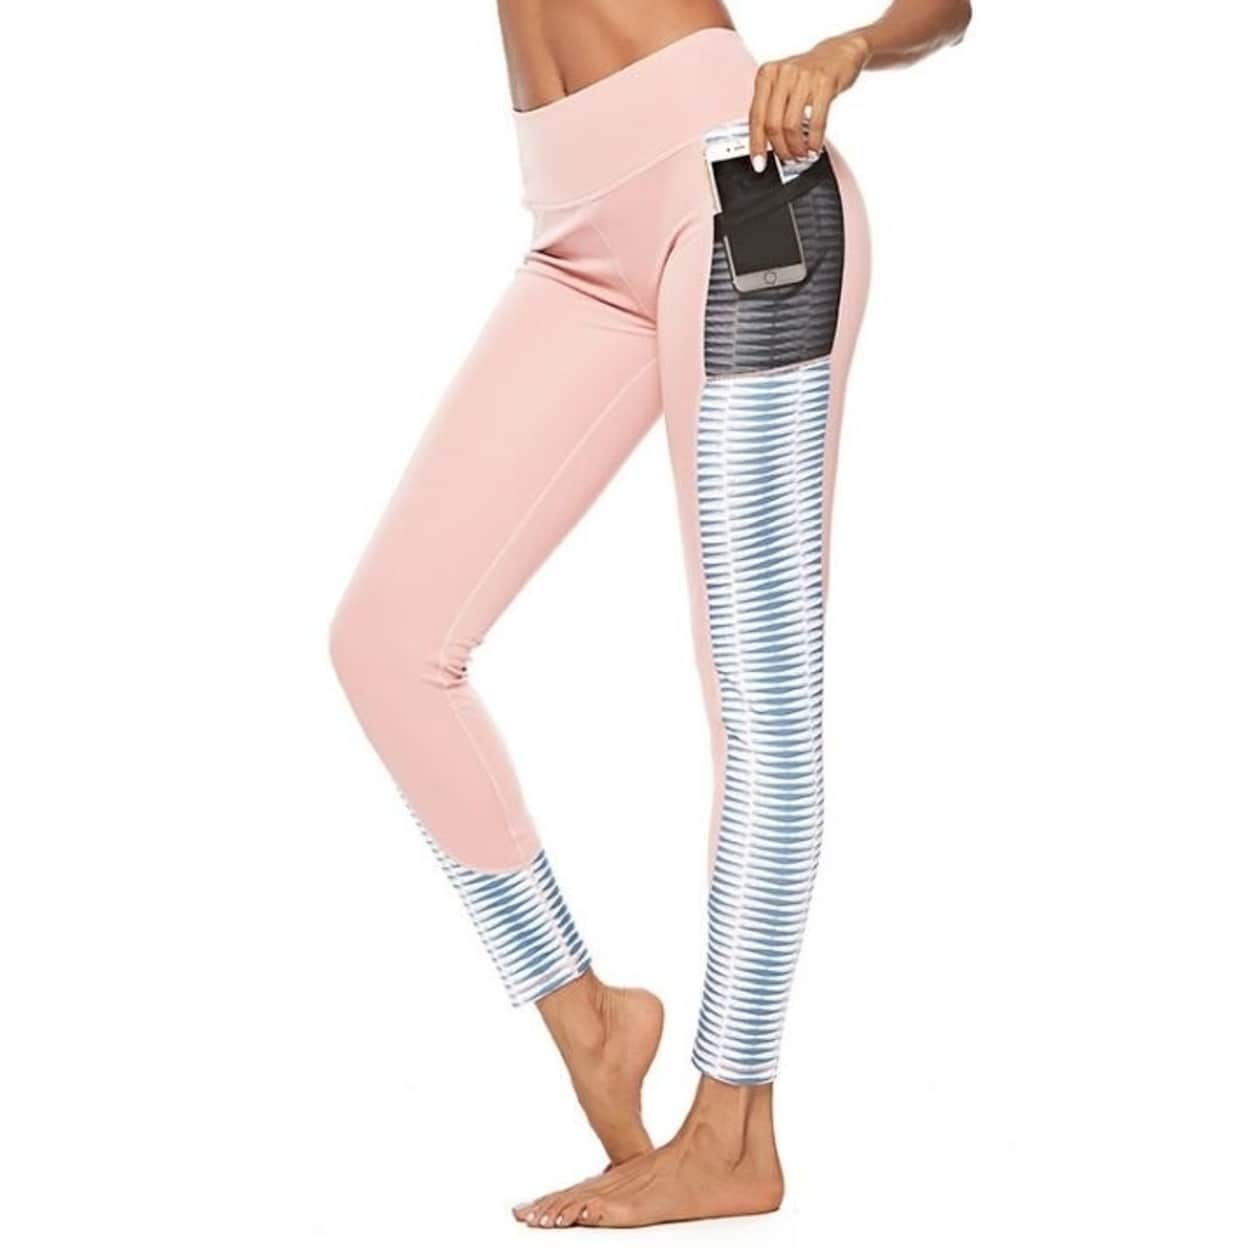 women's workout pants with pockets